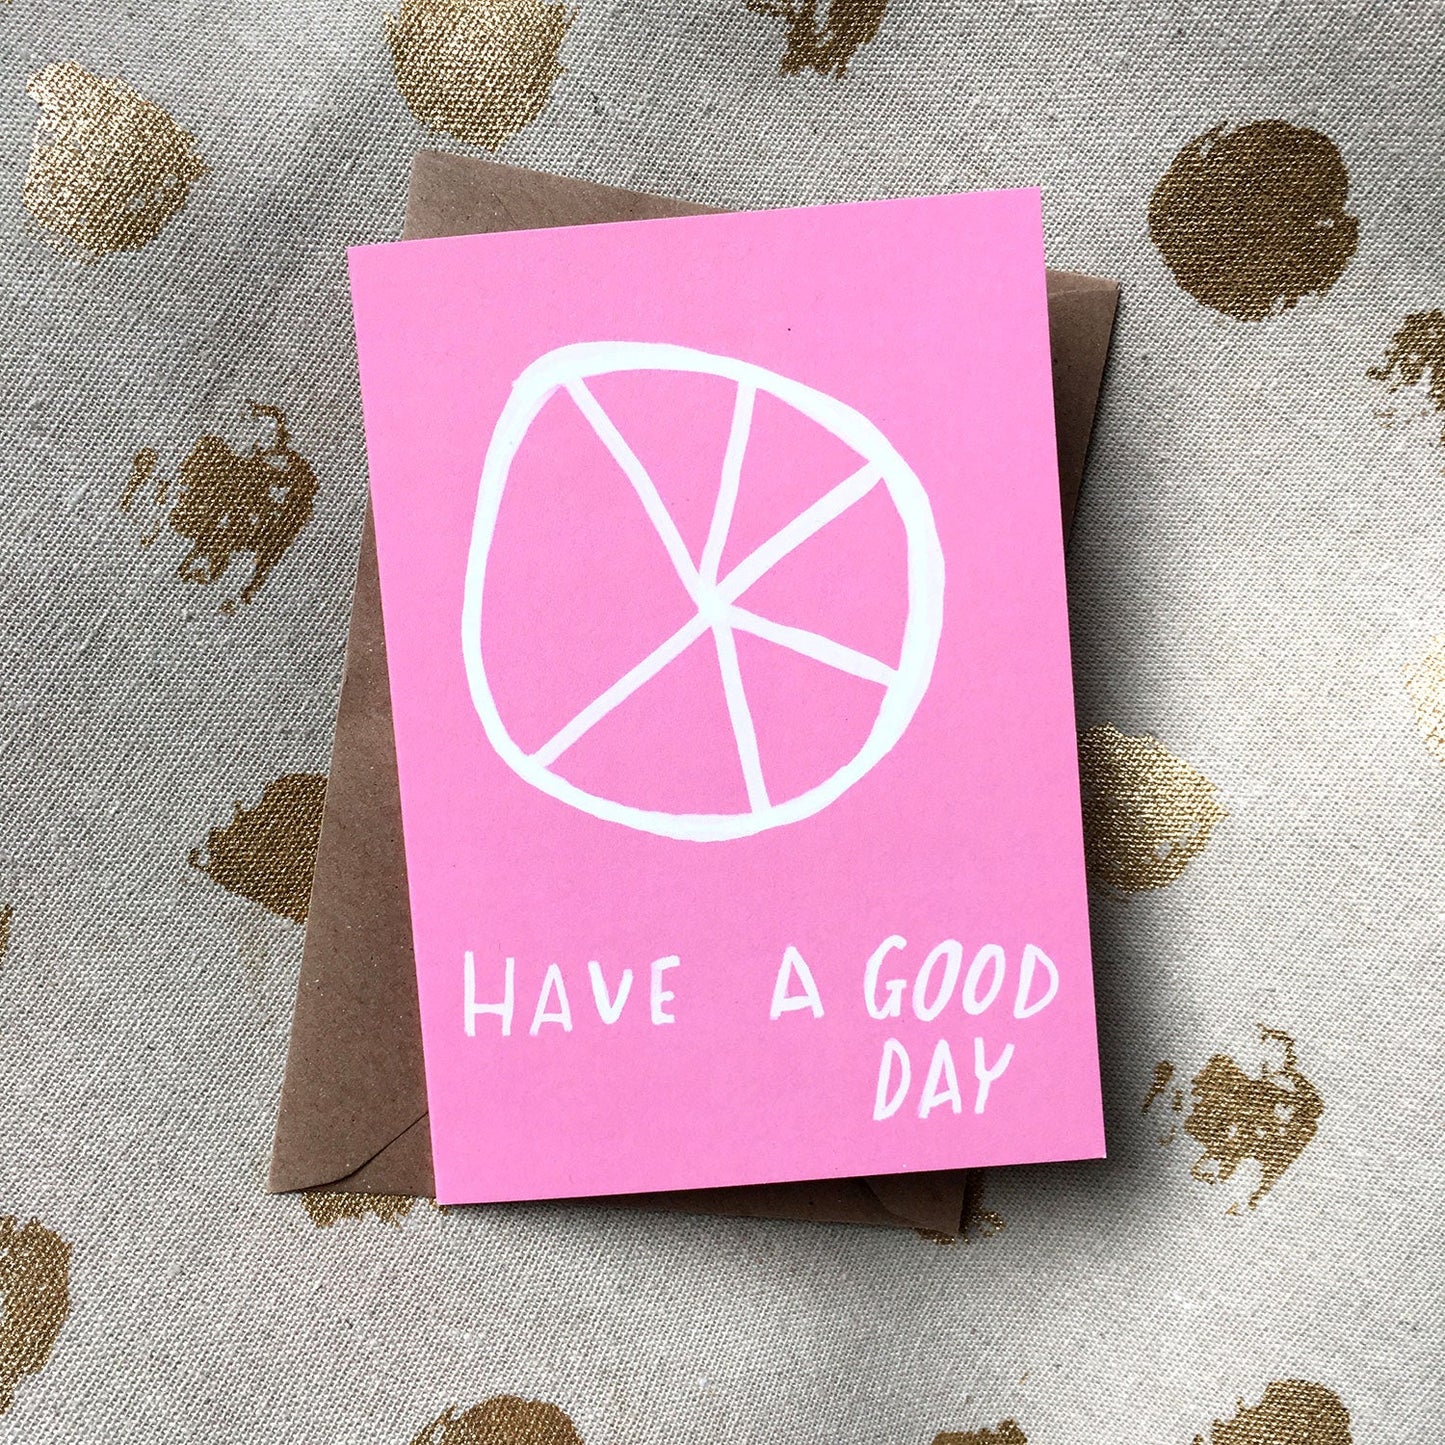 Have a good day card